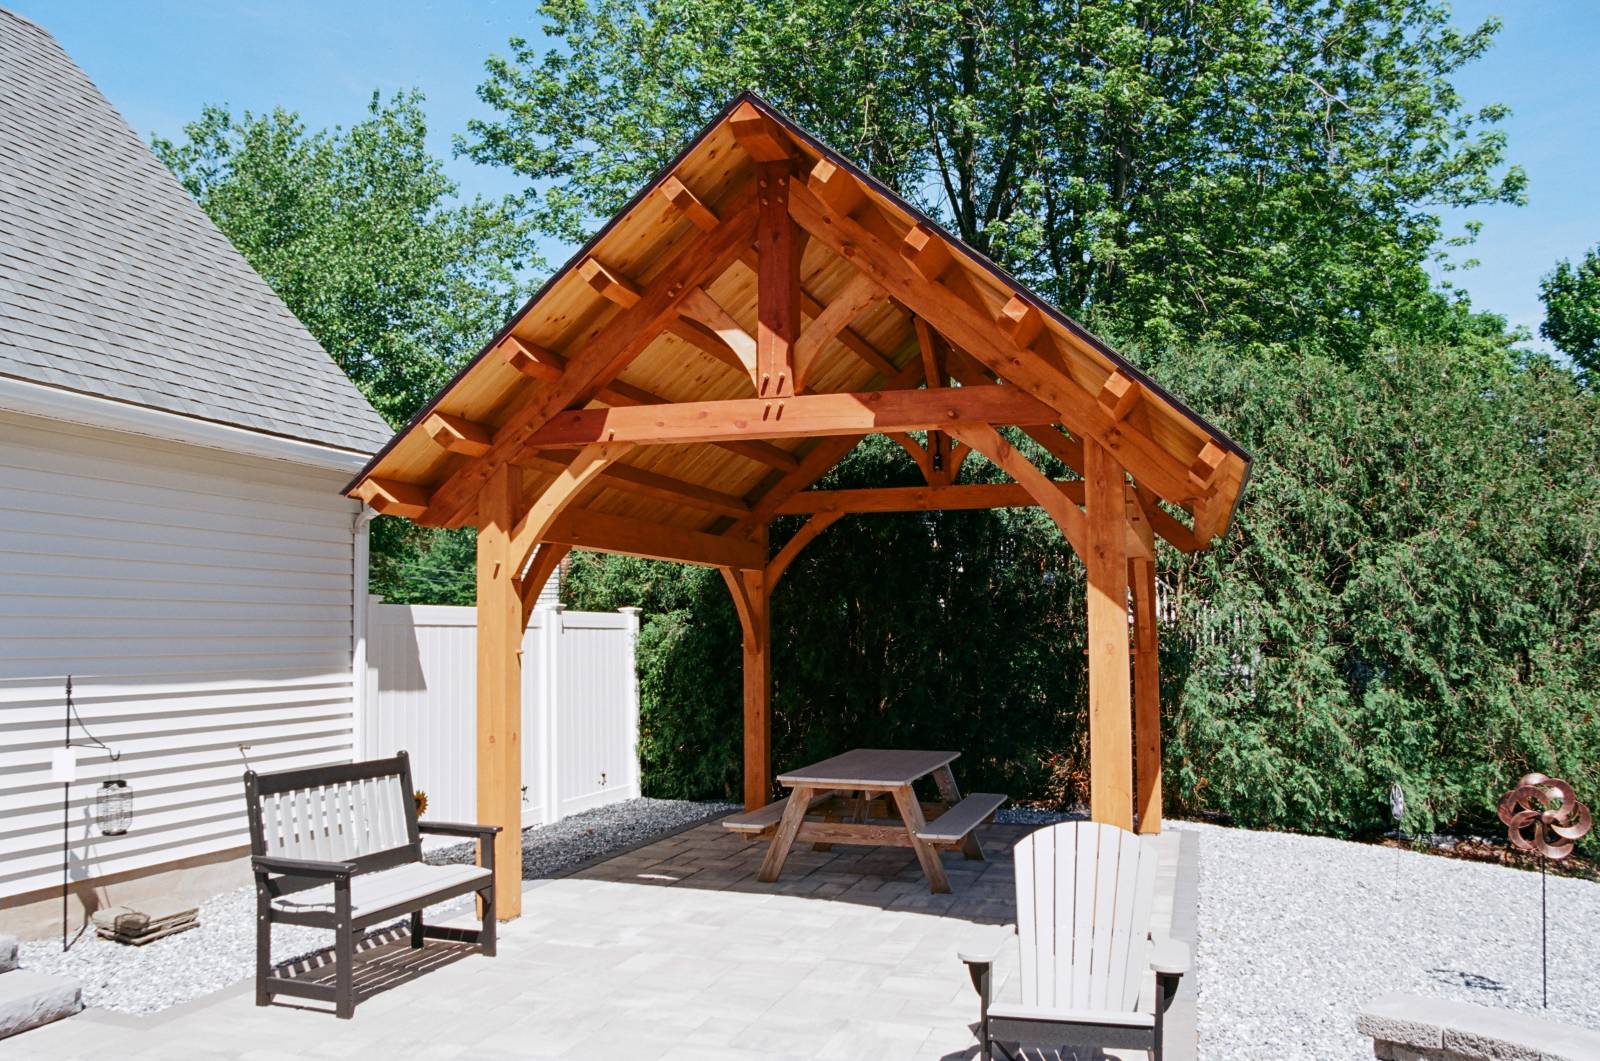 Timber frame pavilion with traditional common purlins & king post truss at the heart of this outdoor living space